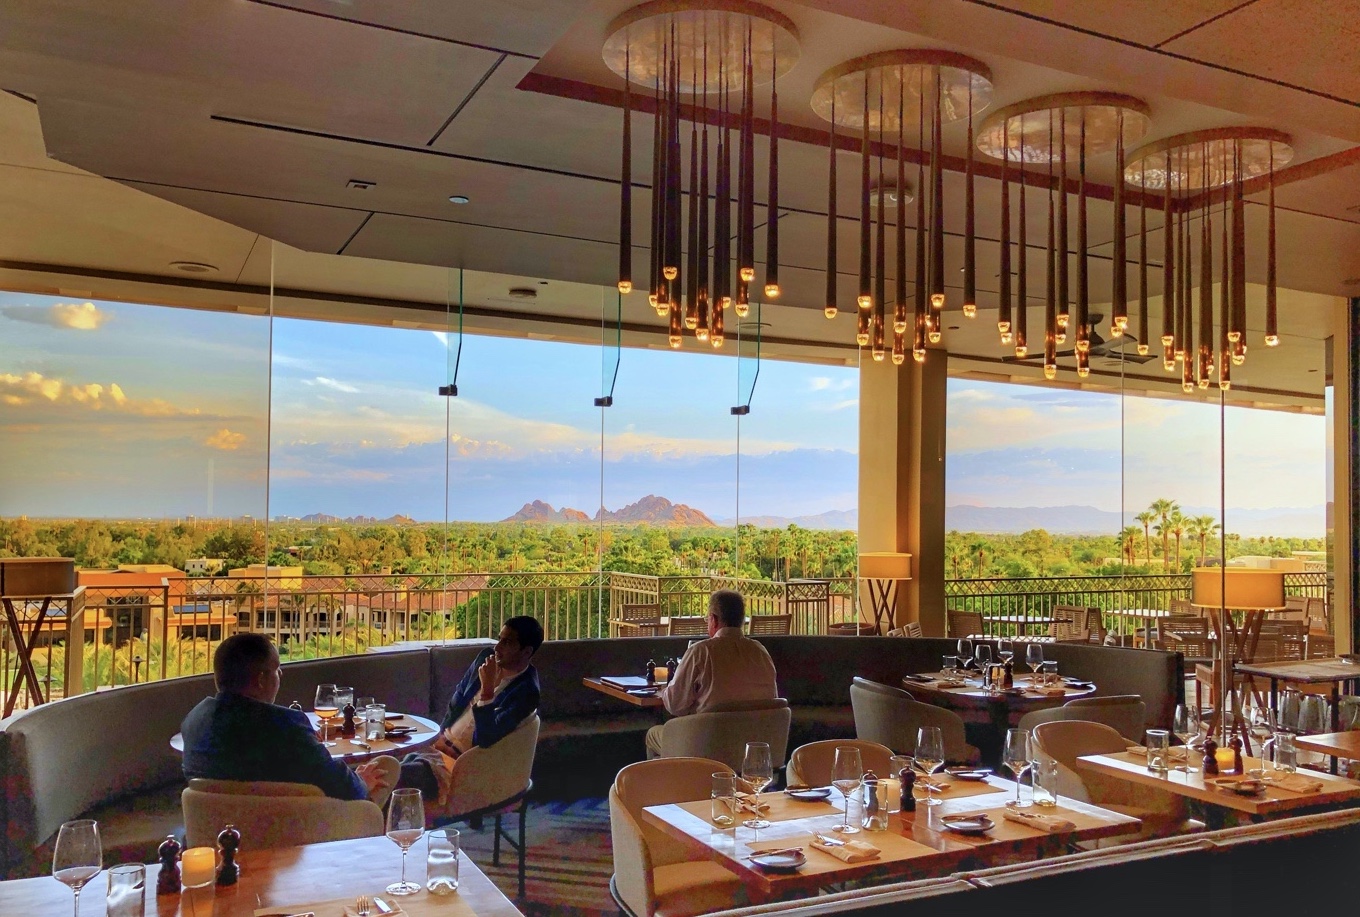 Sunset Views from the J&G Steakhouse in Scottsdale Arizona